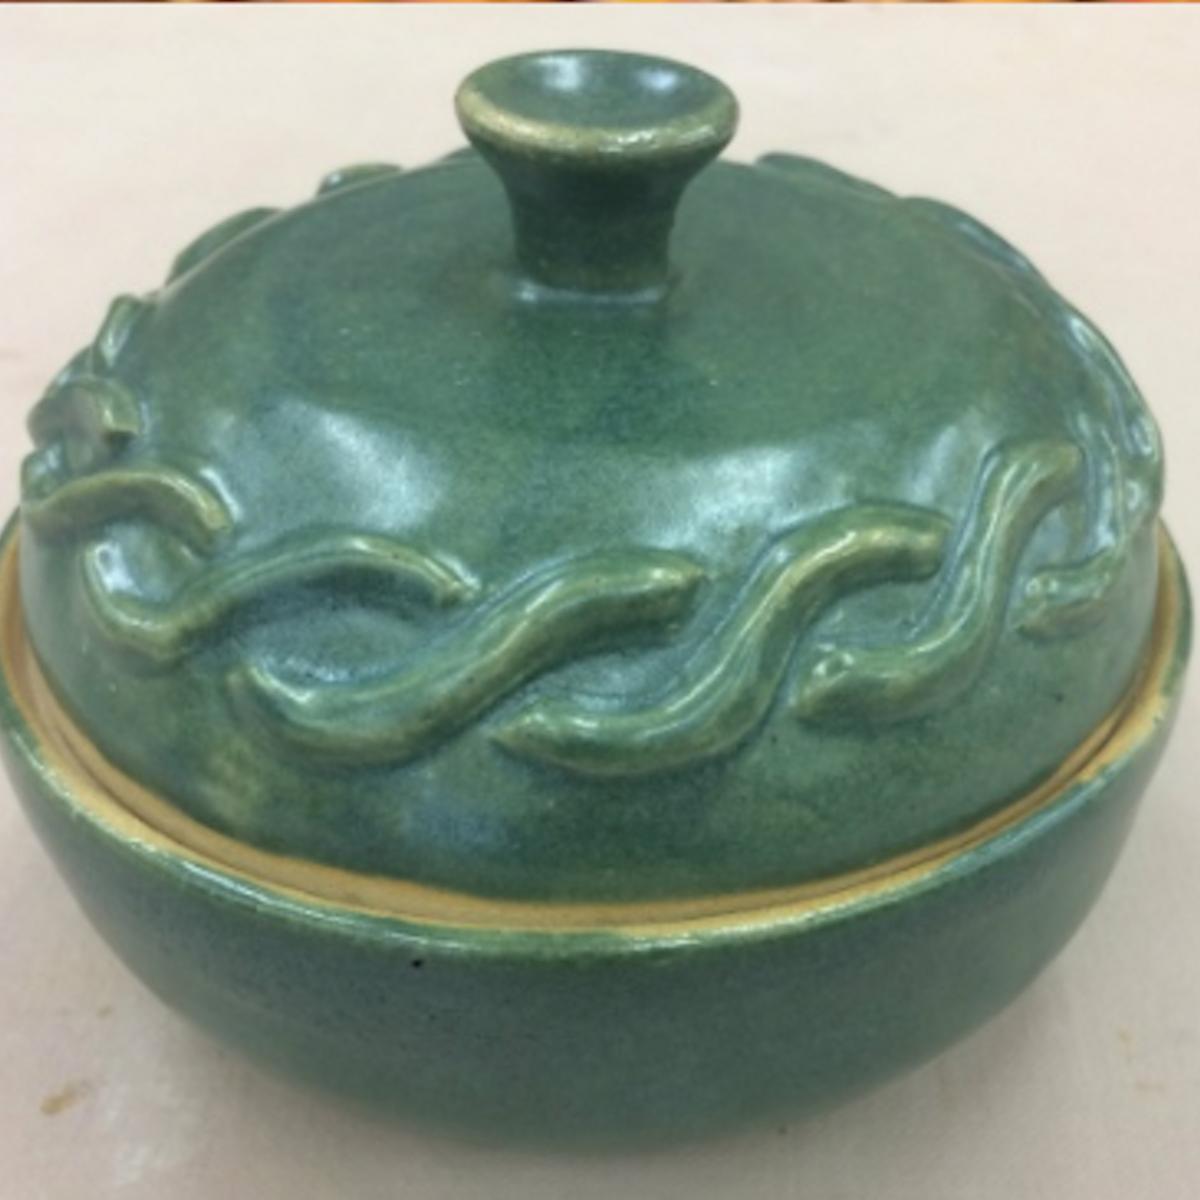 Green clay bowl and lid with Celtic weaves around the lid made by Sophia Hart.